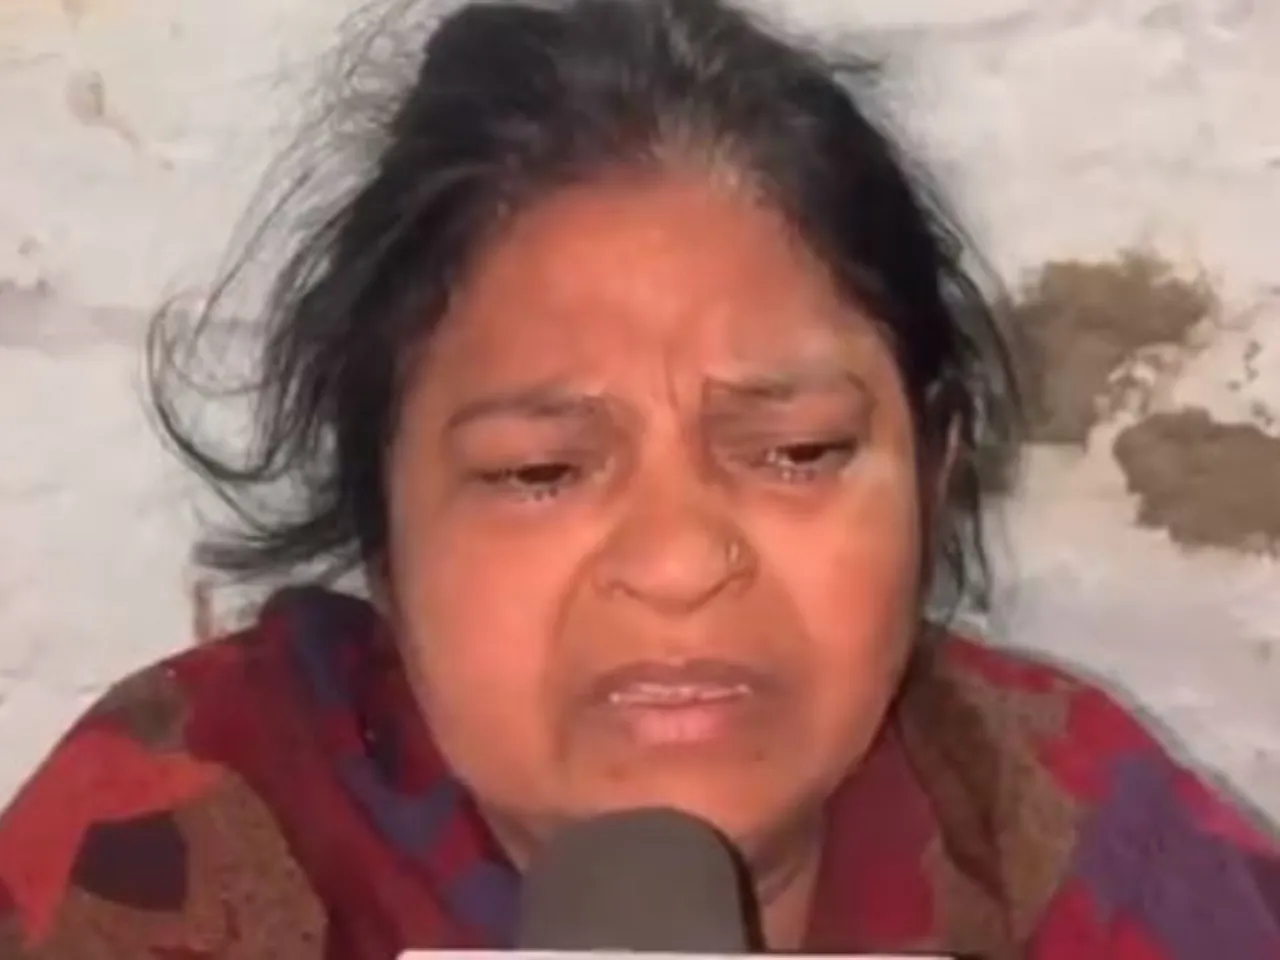 What did the accused's mother say about the Lok Sabha security breach incident